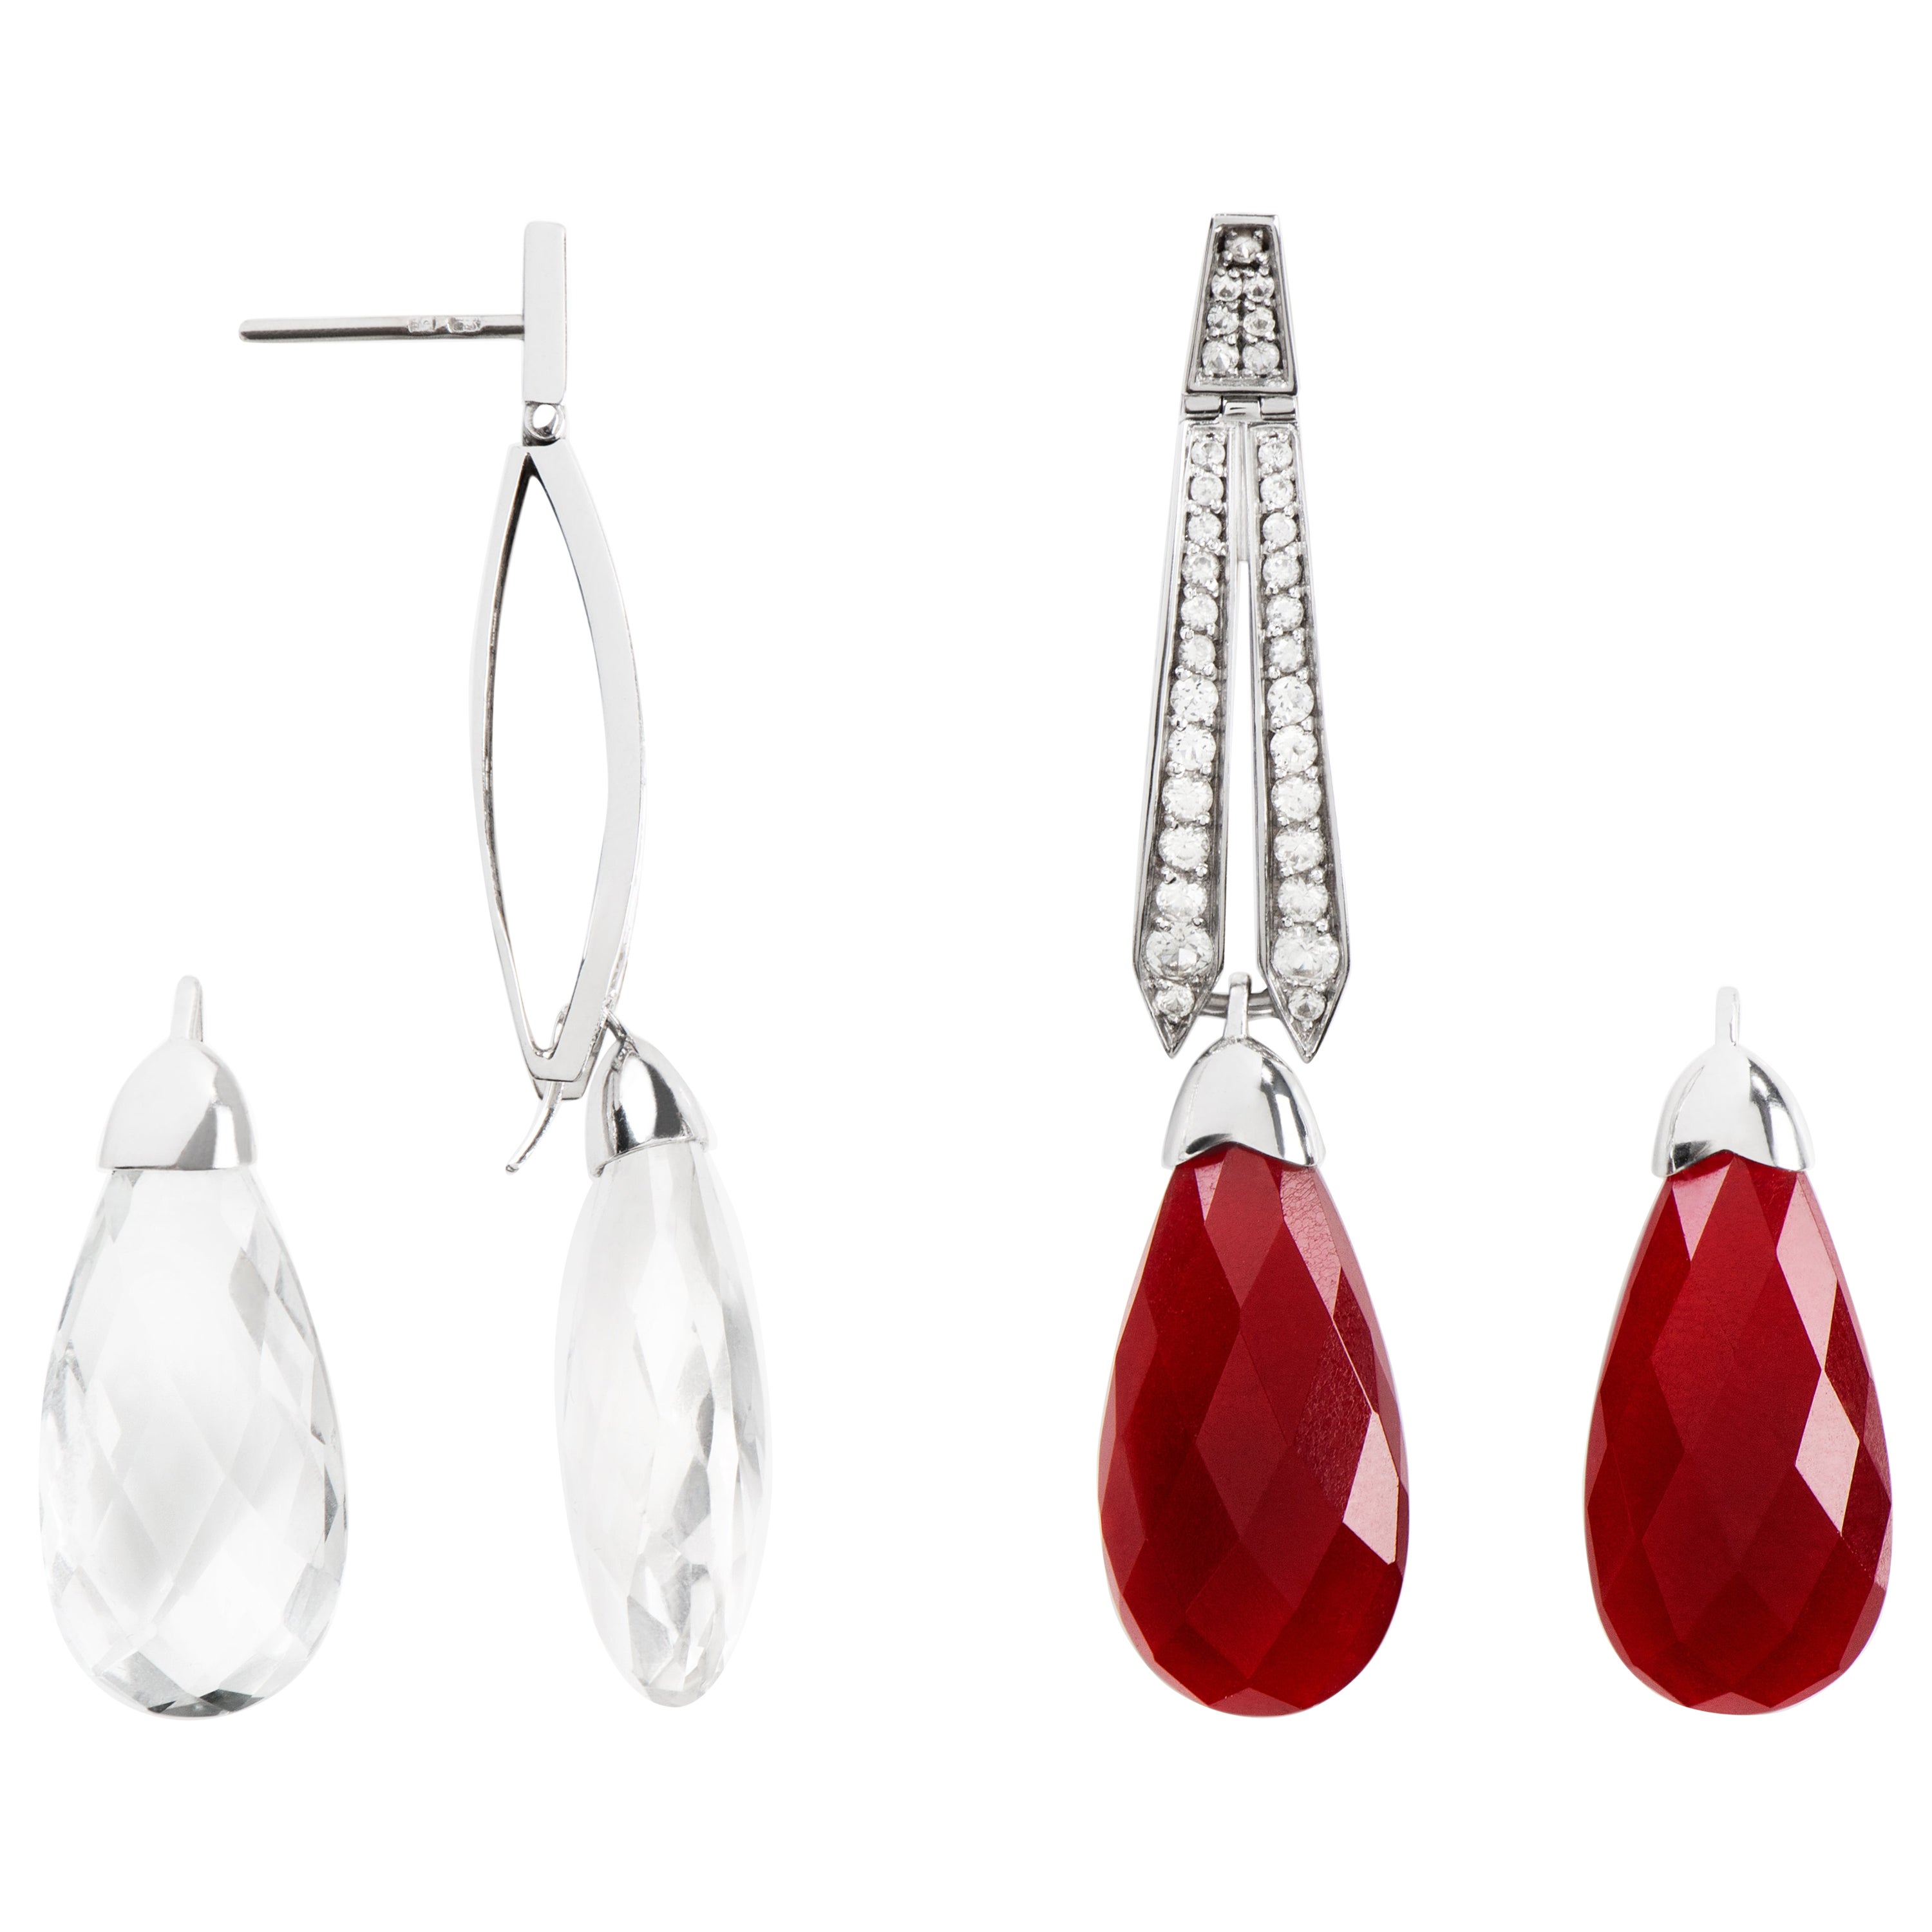 Eliania Rosetti Earrings in 18k Gold 36.4 Cts of White Topaz  25.7 Cts Red Jade